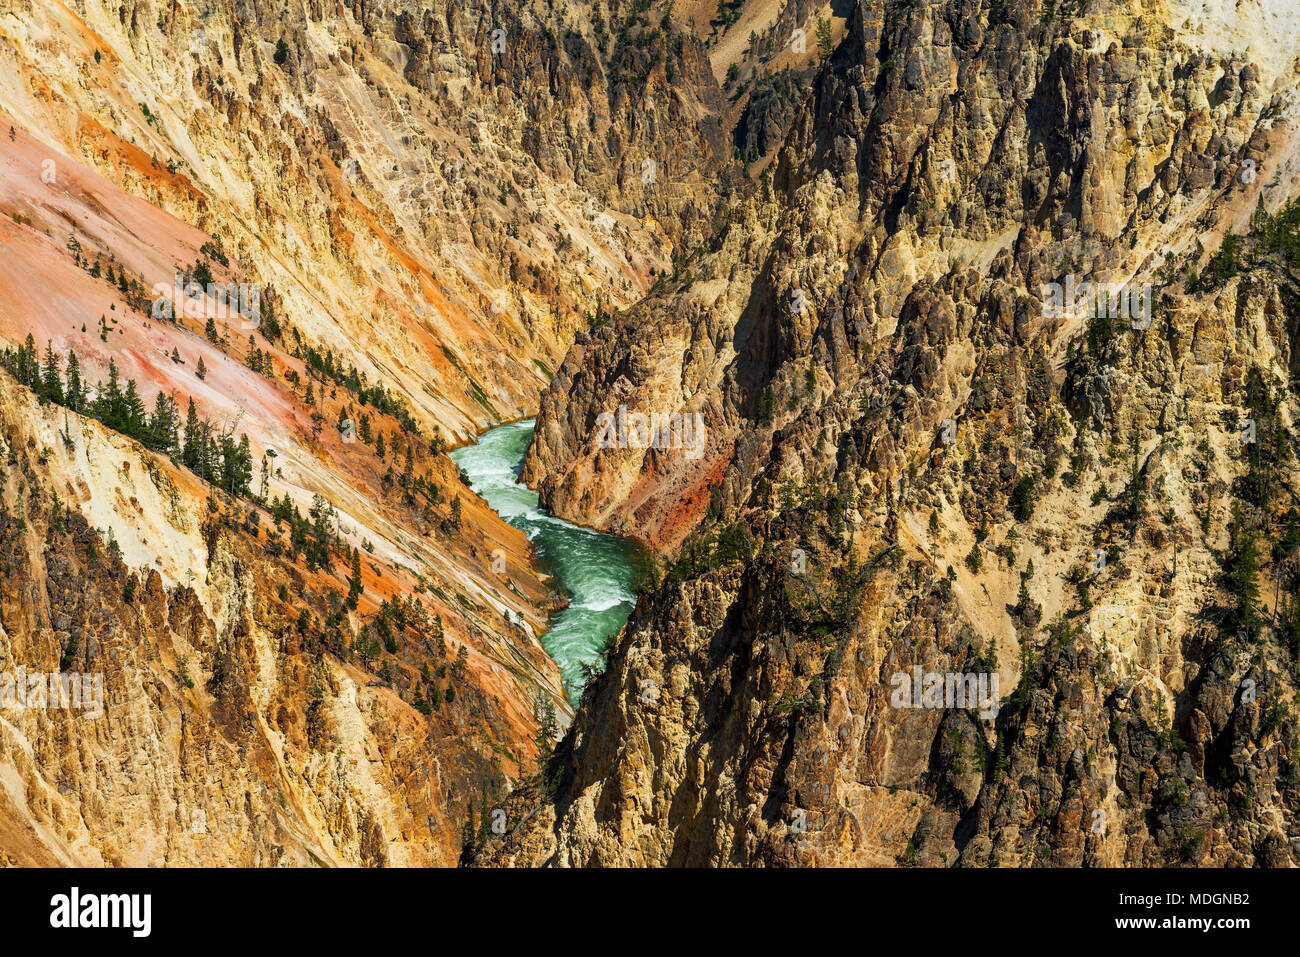 Landscape over the Grand canyon of the Yellowstone with the Yellowstone river underneath inside Yellowstone National Park, Wyoming, USA. Stock Photo